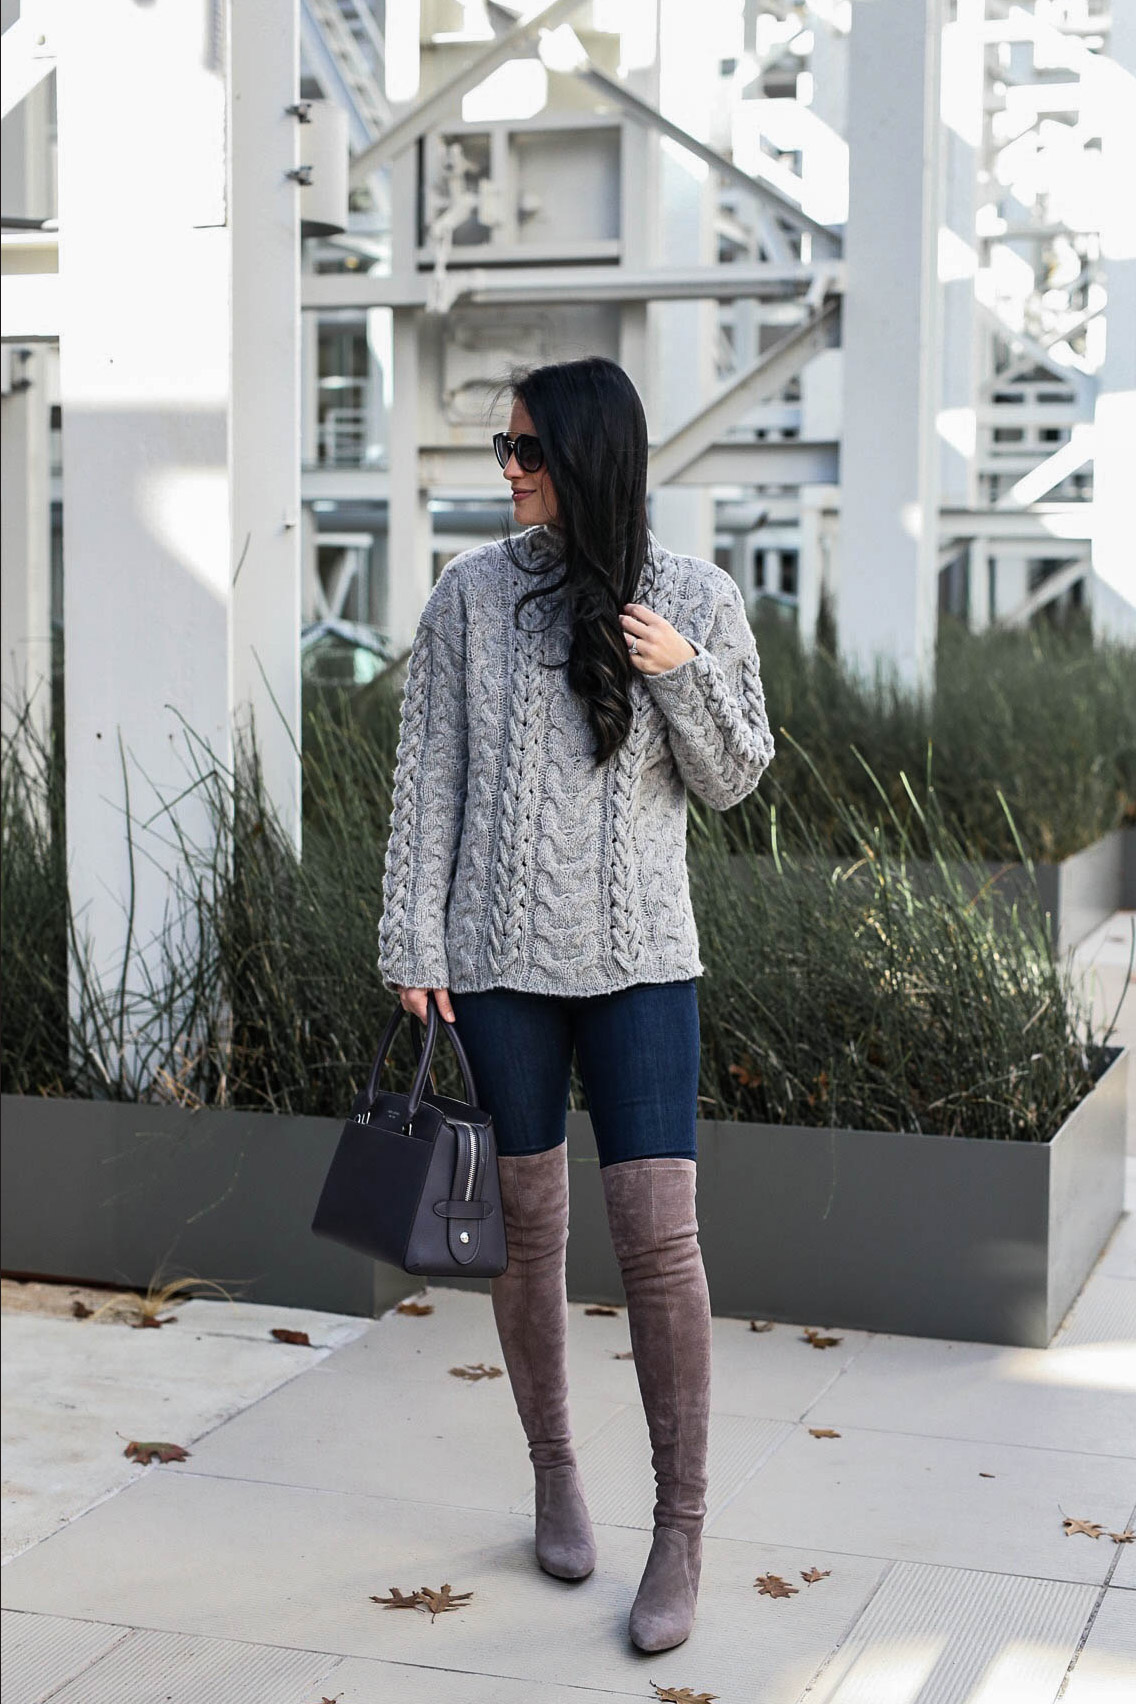 Affordable Sweaters You Need This Winter Under $100 from Chicwish | winter sweaters | affordable winter sweaters | winter fashion tips | what to wear for winter || Dressed to Kill #sweaterweather #wintersweaters #affordablesweaters - Chicwish Winter Sweaters Under $100 by Austin fashion blogger Dressed to Kill